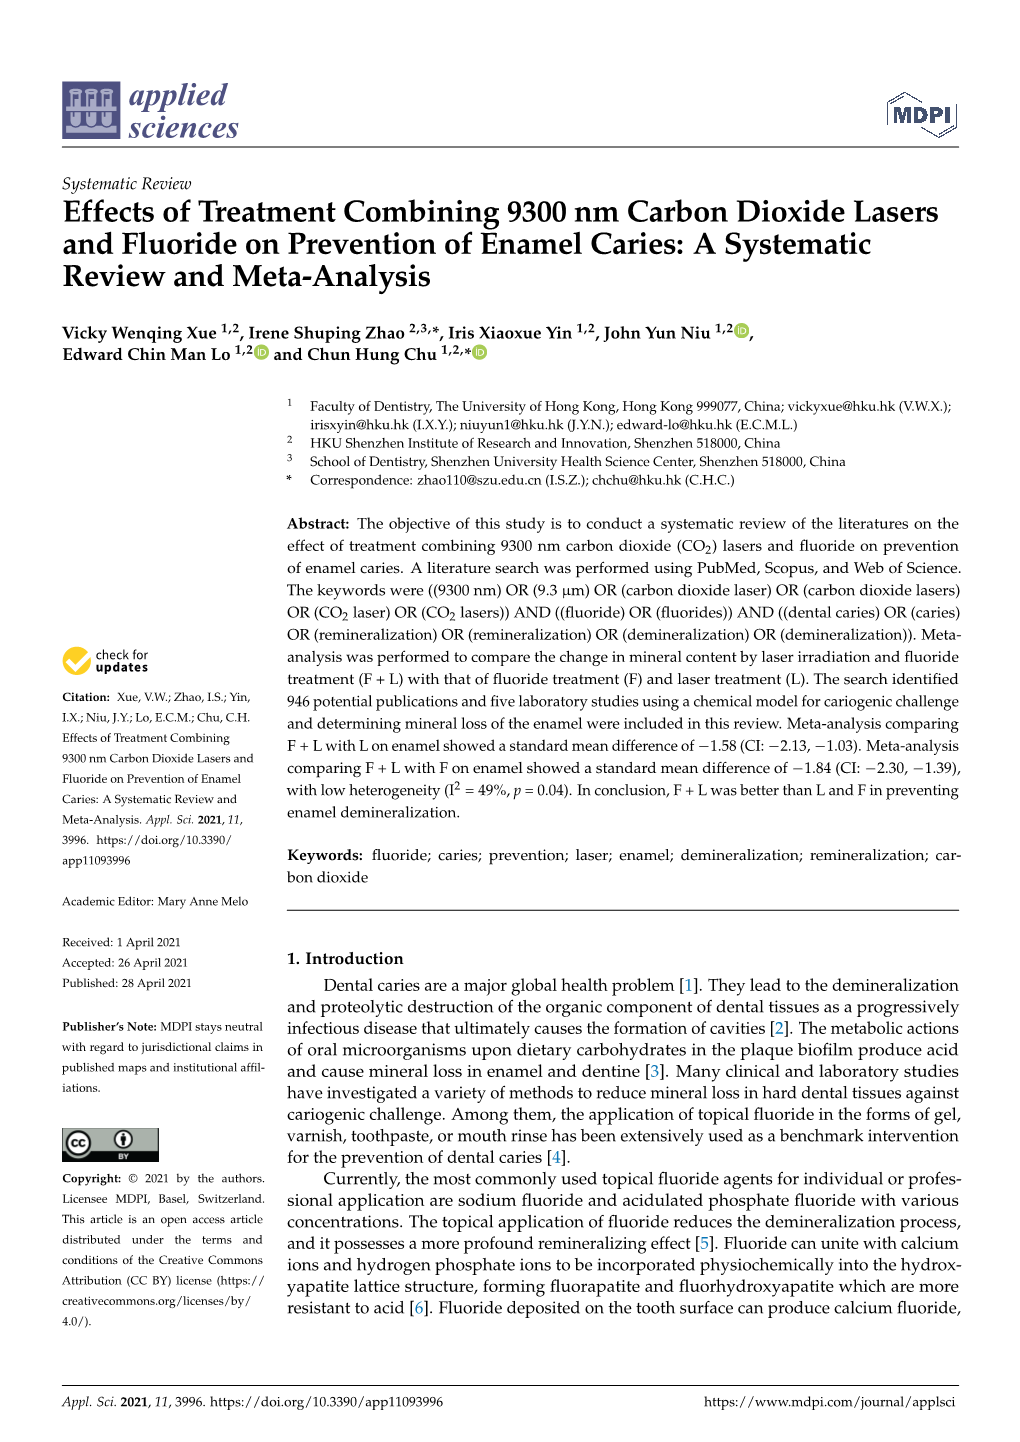 Effects of Treatment Combining 9300 Nm Carbon Dioxide Lasers and Fluoride on Prevention of Enamel Caries: a Systematic Review and Meta-Analysis